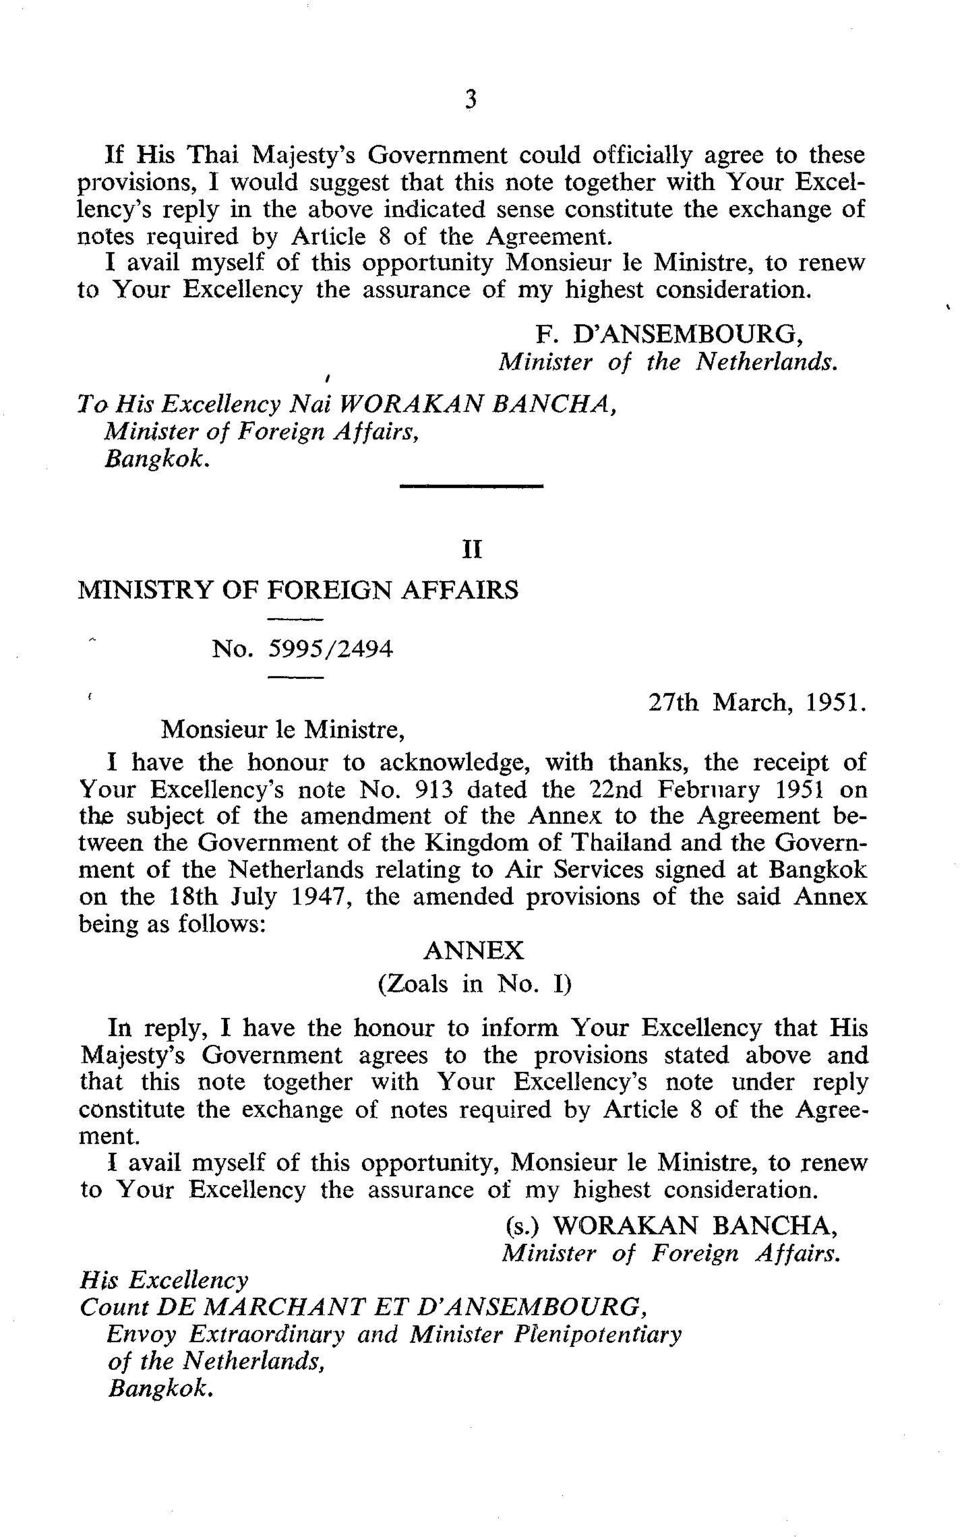 To His Excellency Nai WORAKAN Minister of Foreign Affairs, Bangkok. F. D'ANSEMBOURG, Minister of the Netherlands. BANCHA, MINISTRY OF FOREIGN AFFAIRS No. 5995/2494 II 27th March, 1951.